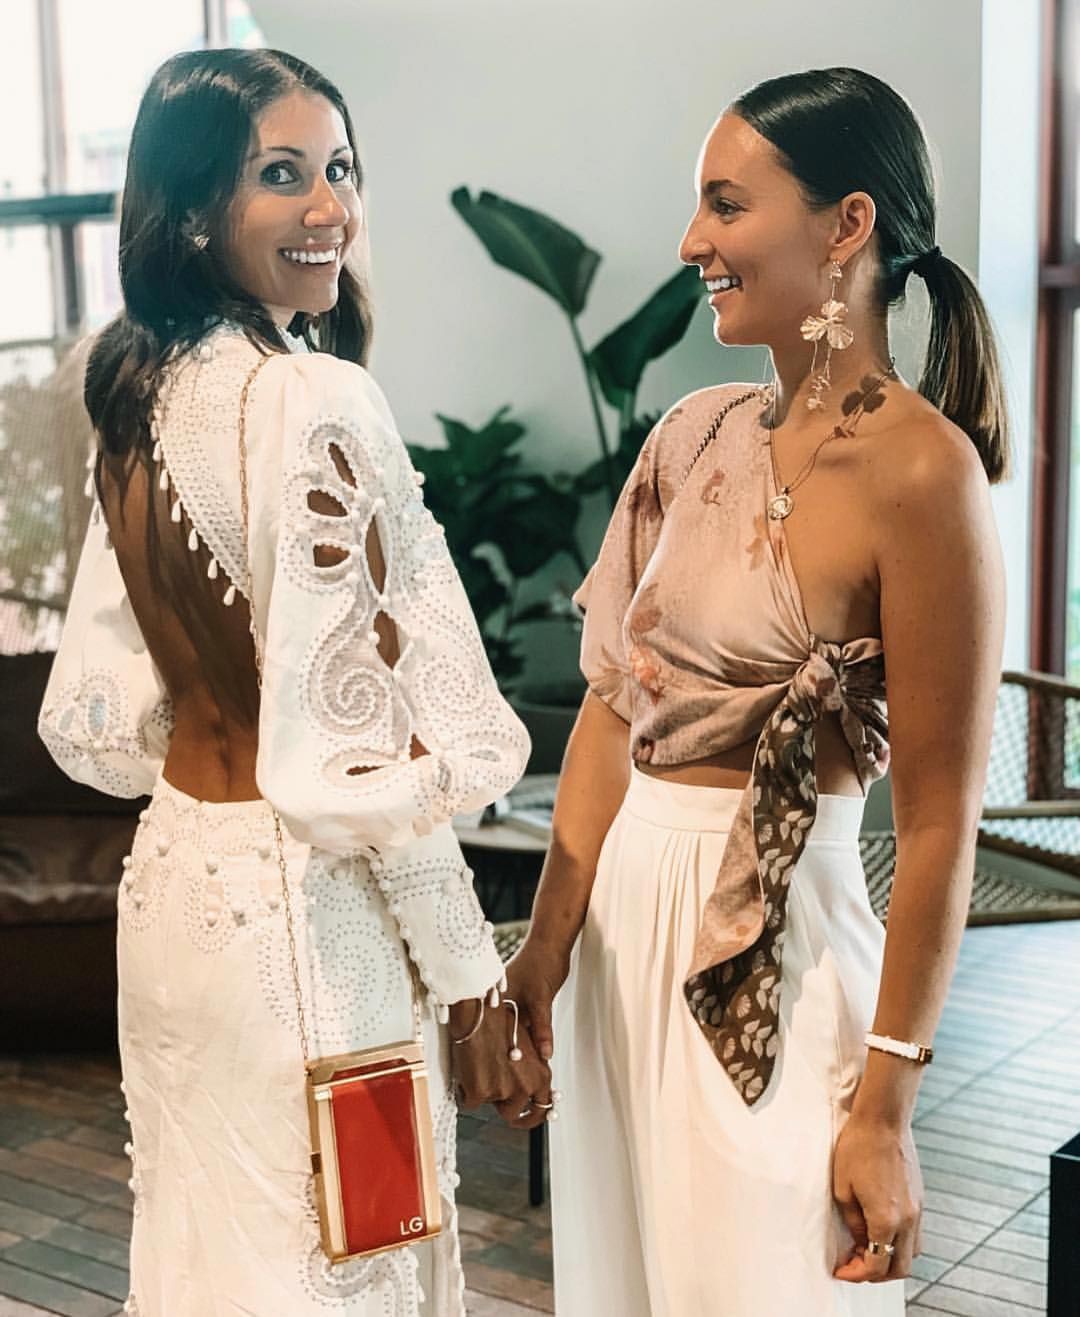 All The Dresses | Australia on Instagram: “Zimmermann ‘Ninety-Six Ric Rac Dress’ spotted on the gorgeous @lissygraham available for hire for your next event! Find this dress and over…” | Summer Outfit Ideas 2020: Dresses Ideas,  Outfit Ideas,  summer outfits,  Instagram  